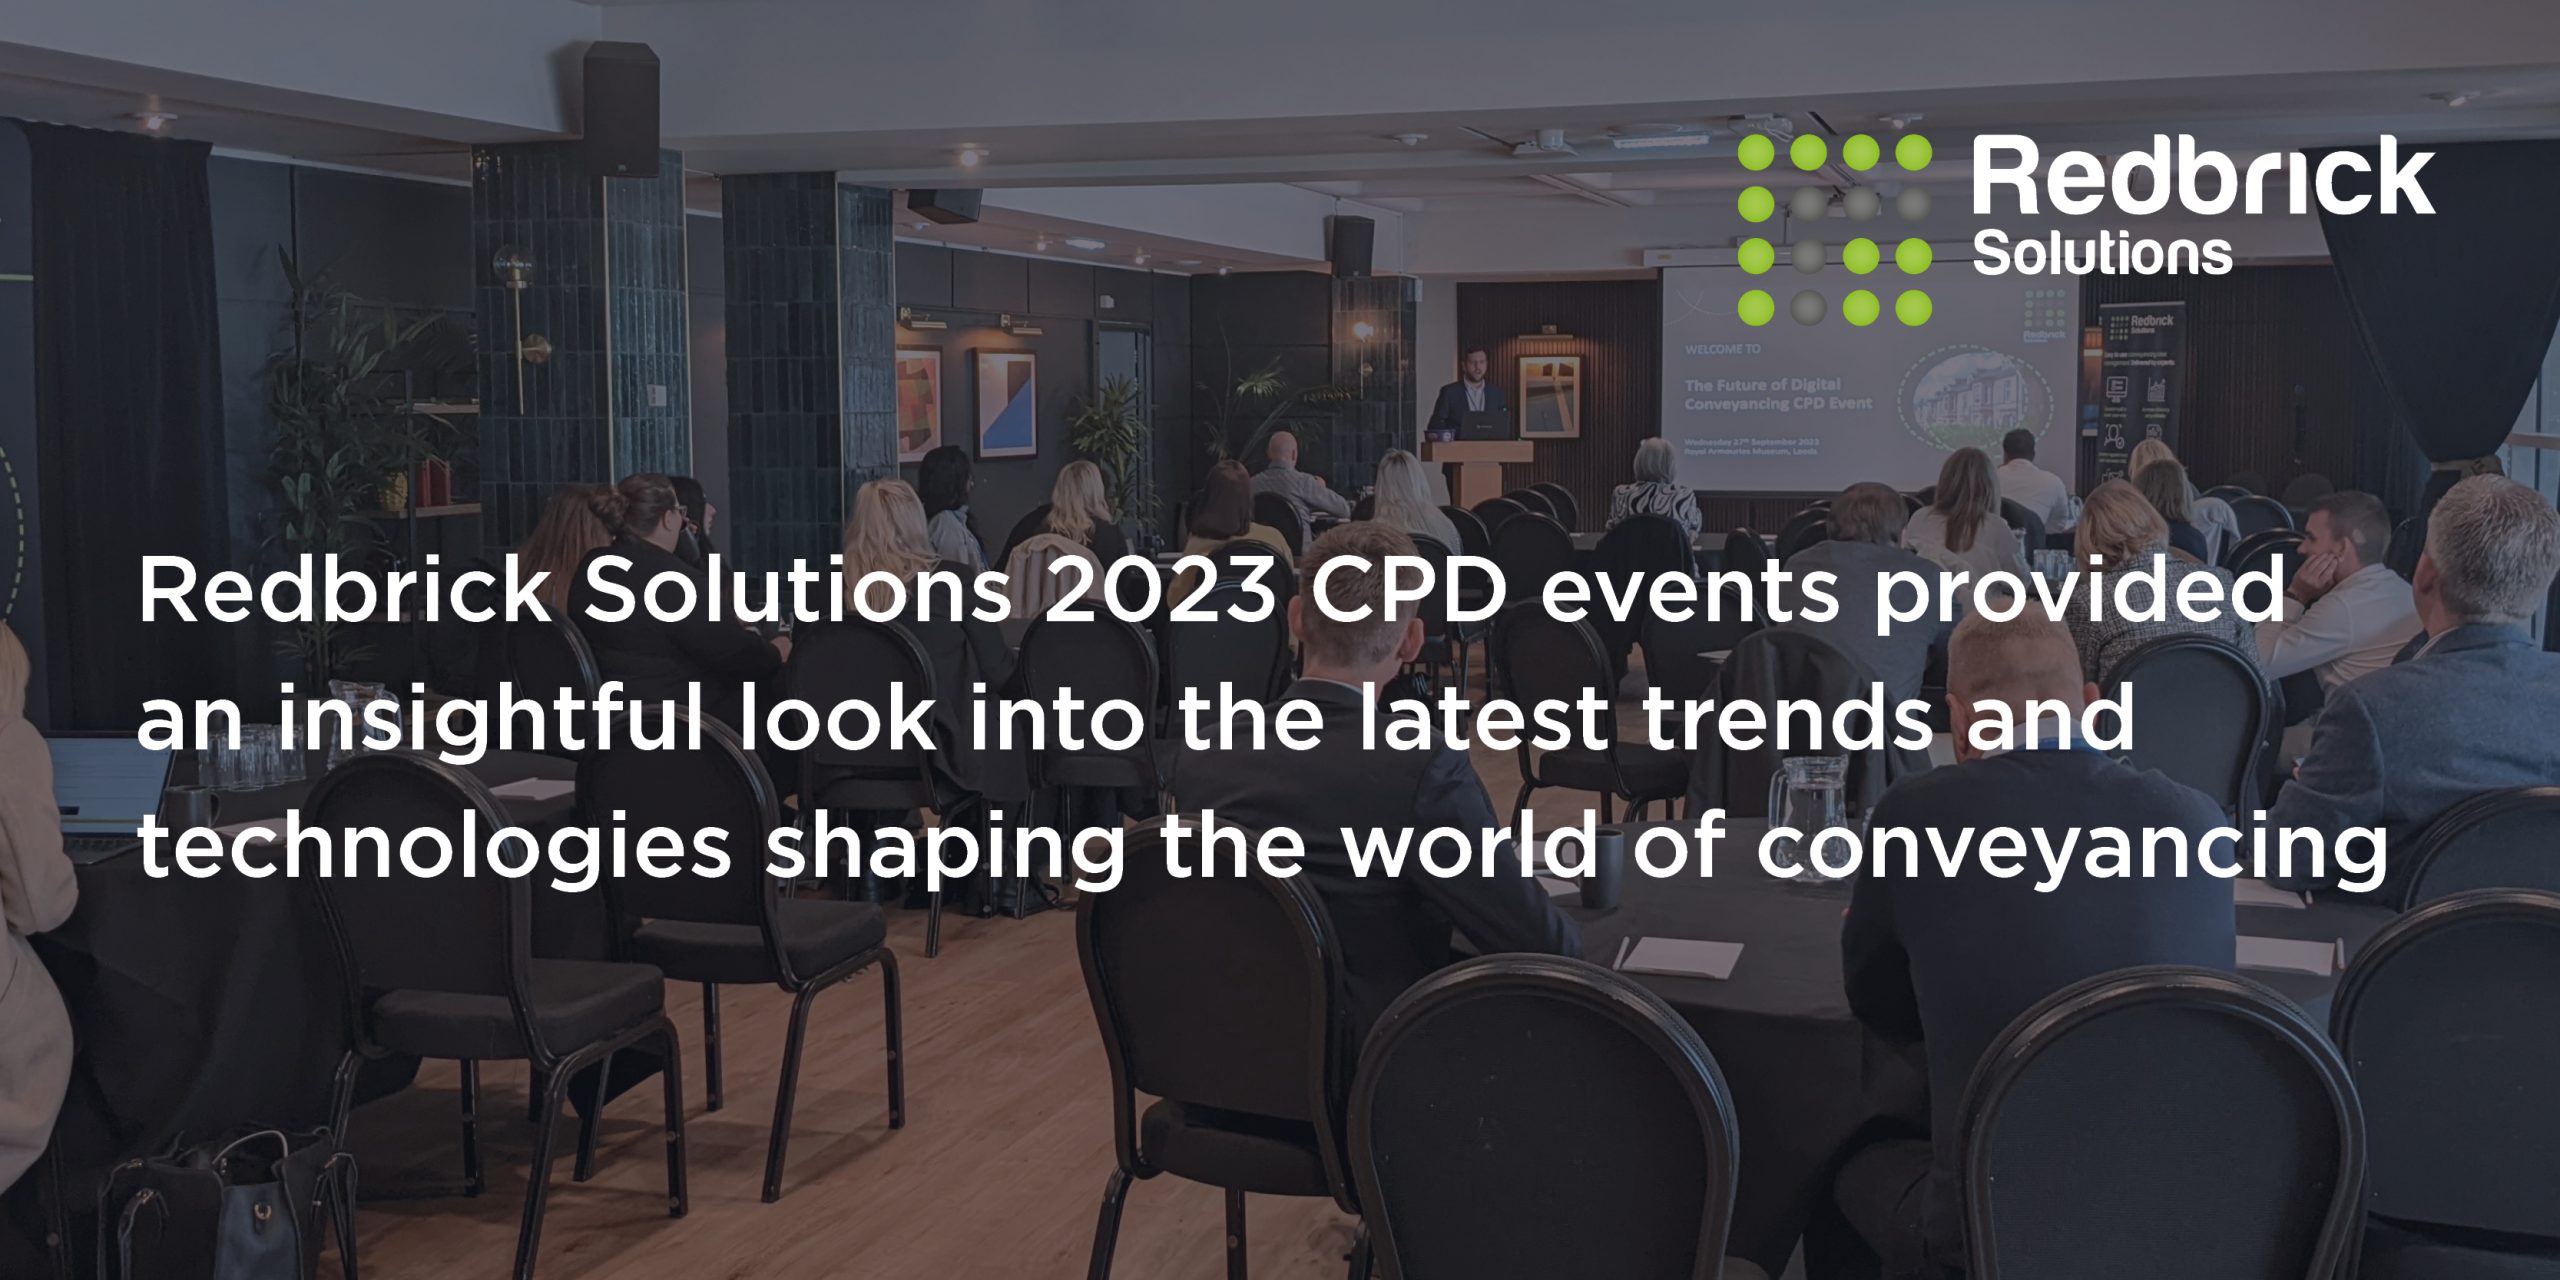 Redbrick Solutions 2023 CPD events provided an insightful look into the latest trends and technologies shaping the world of conveyancing’